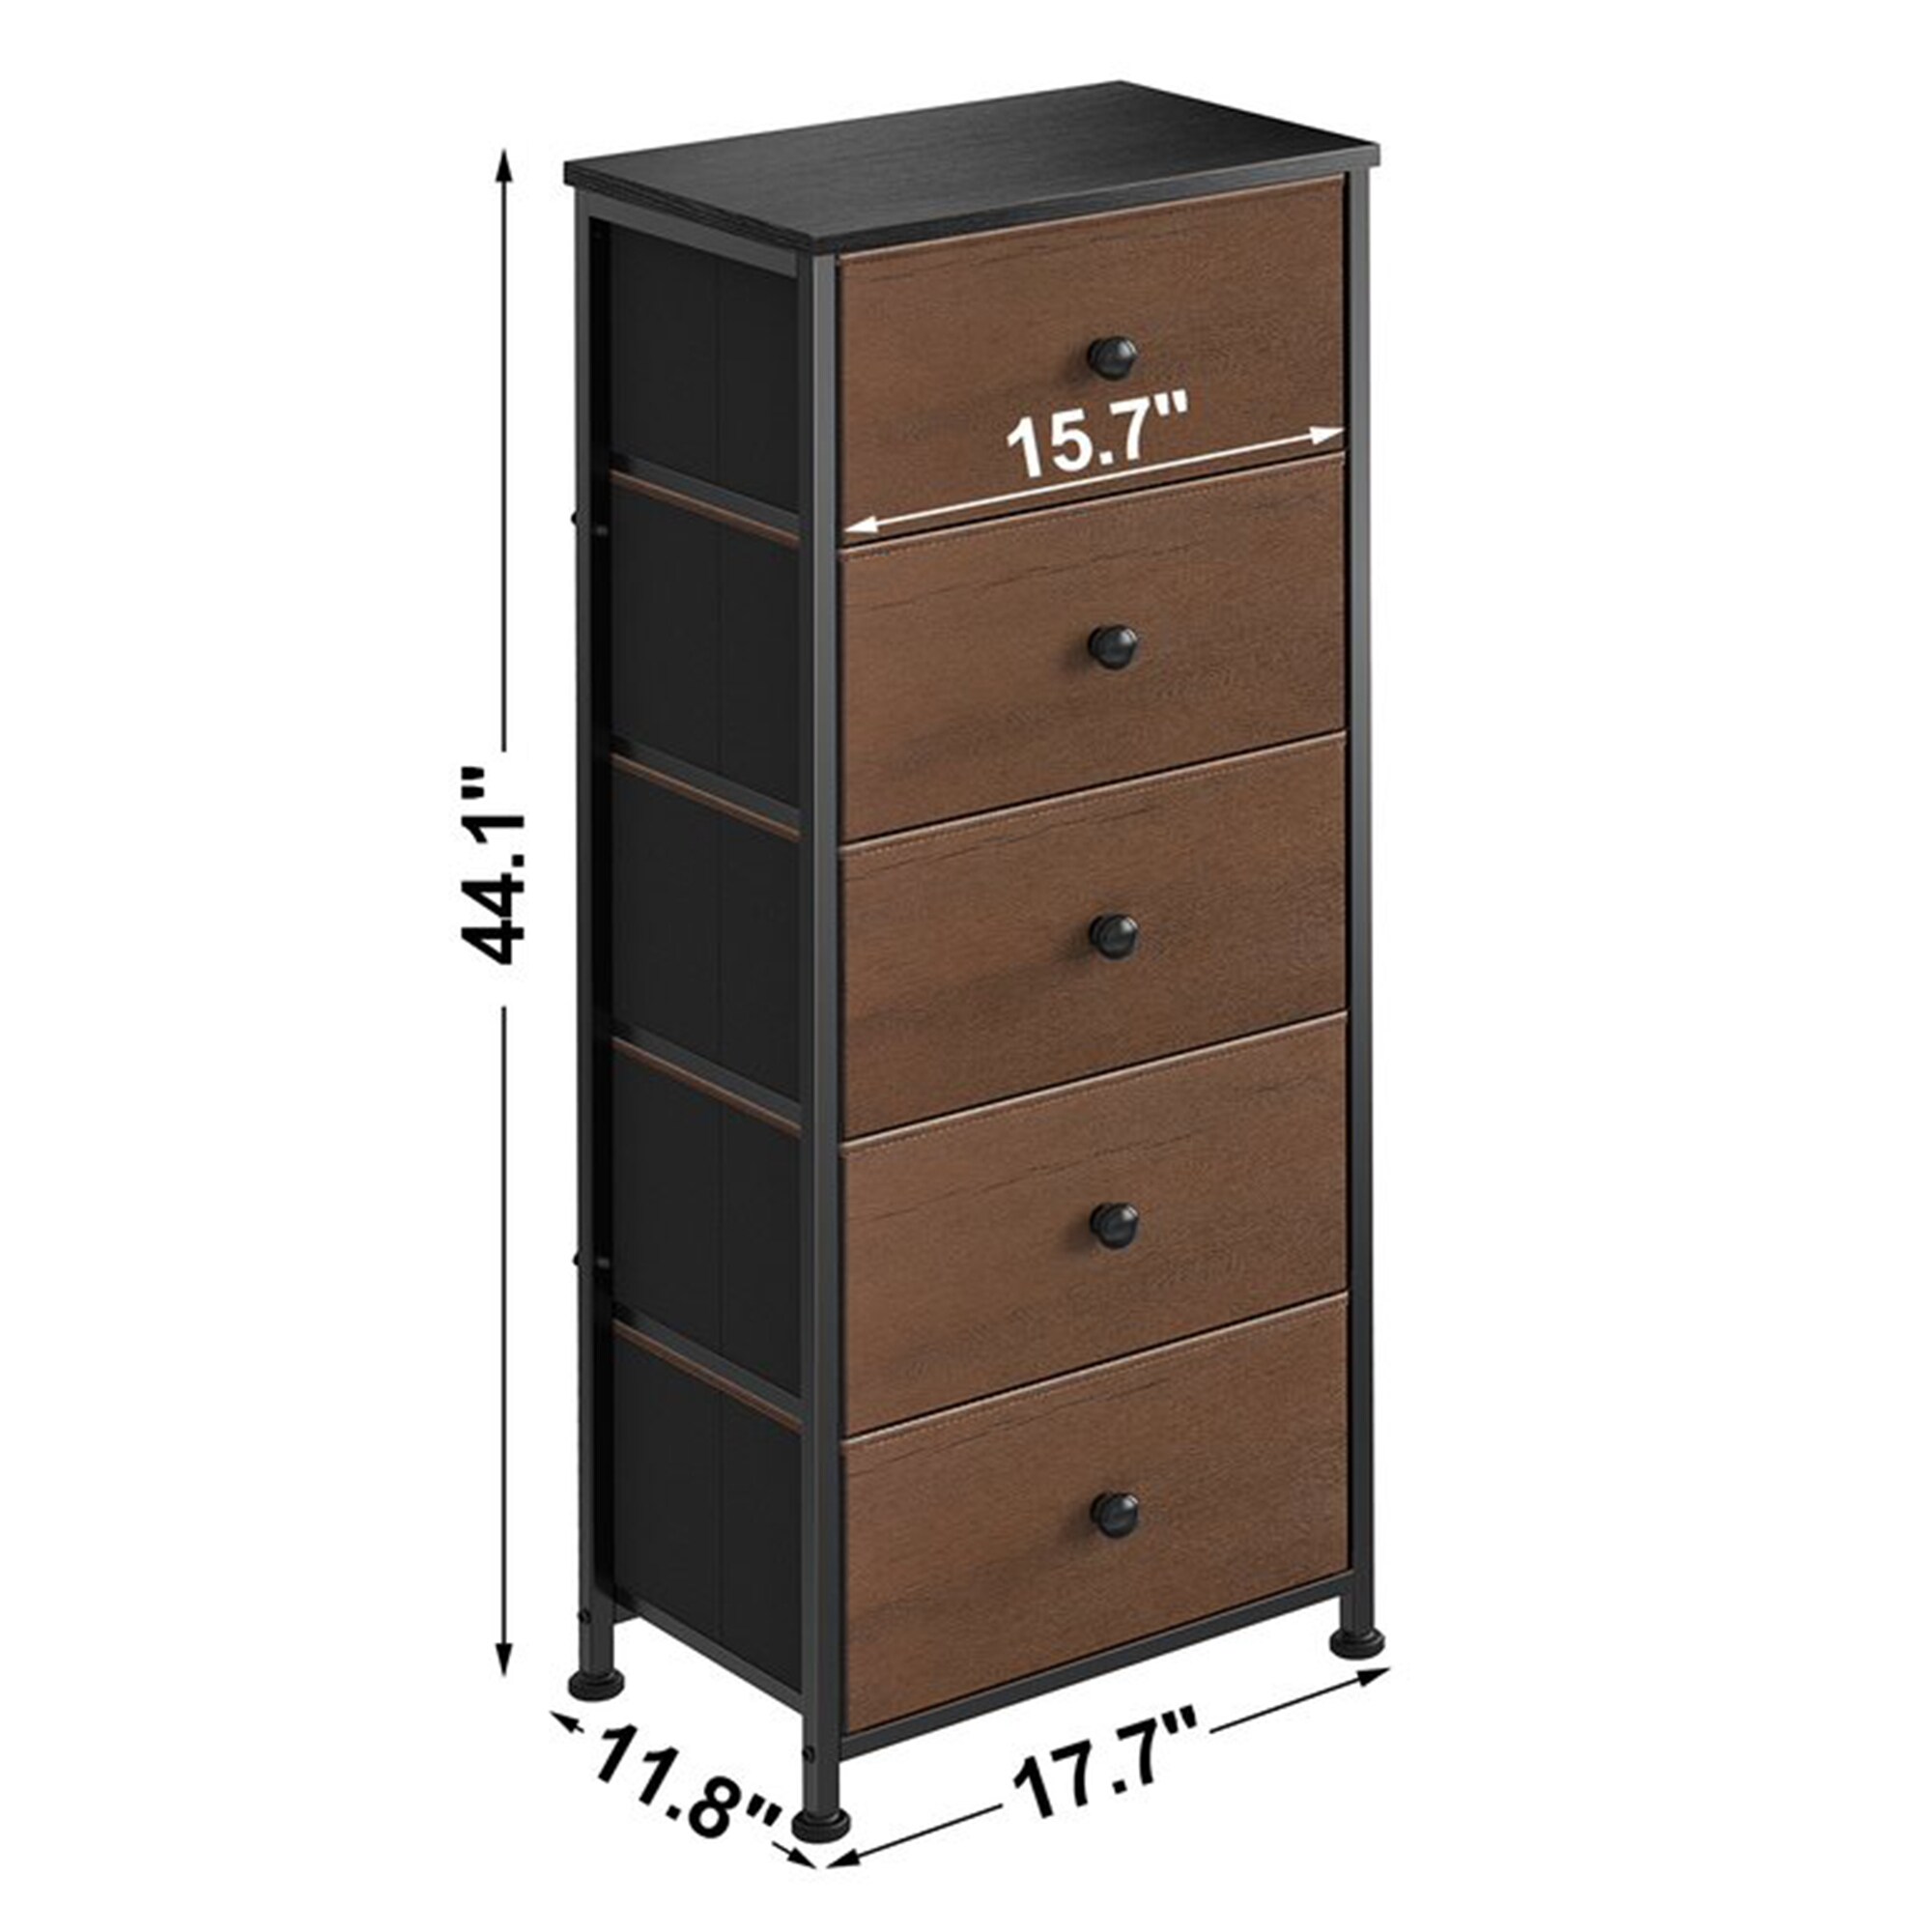 https://ak1.ostkcdn.com/images/products/is/images/direct/54c84f89c894acd8f61f216241d116a3aba3cd33/REAHOME-Vertical-Narrow-Metal-Tower-Dresser-w--5-Fabric-Drawer-Bins%2C-Espresso.jpg